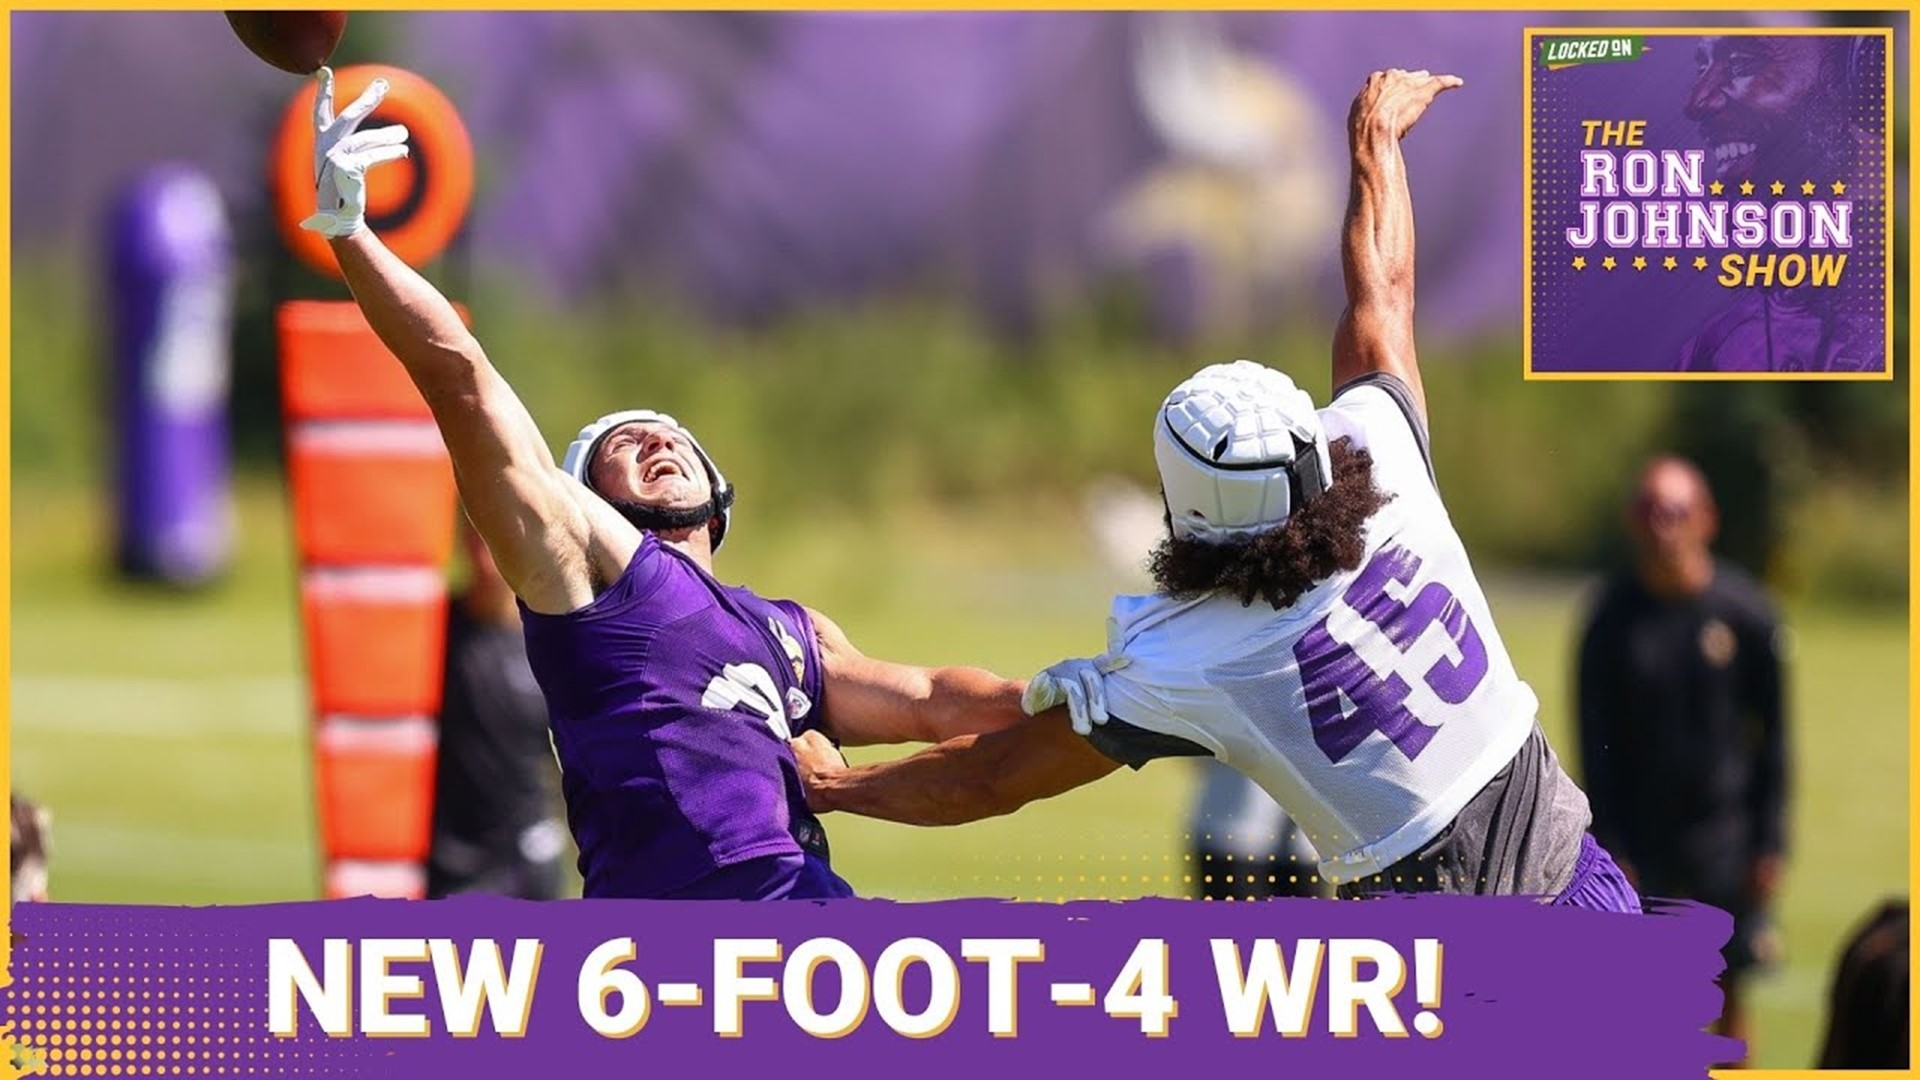 Get to Know NEW 6-FOOT-4 Minnesota Vikings Receiver  The Ron Johnson Show